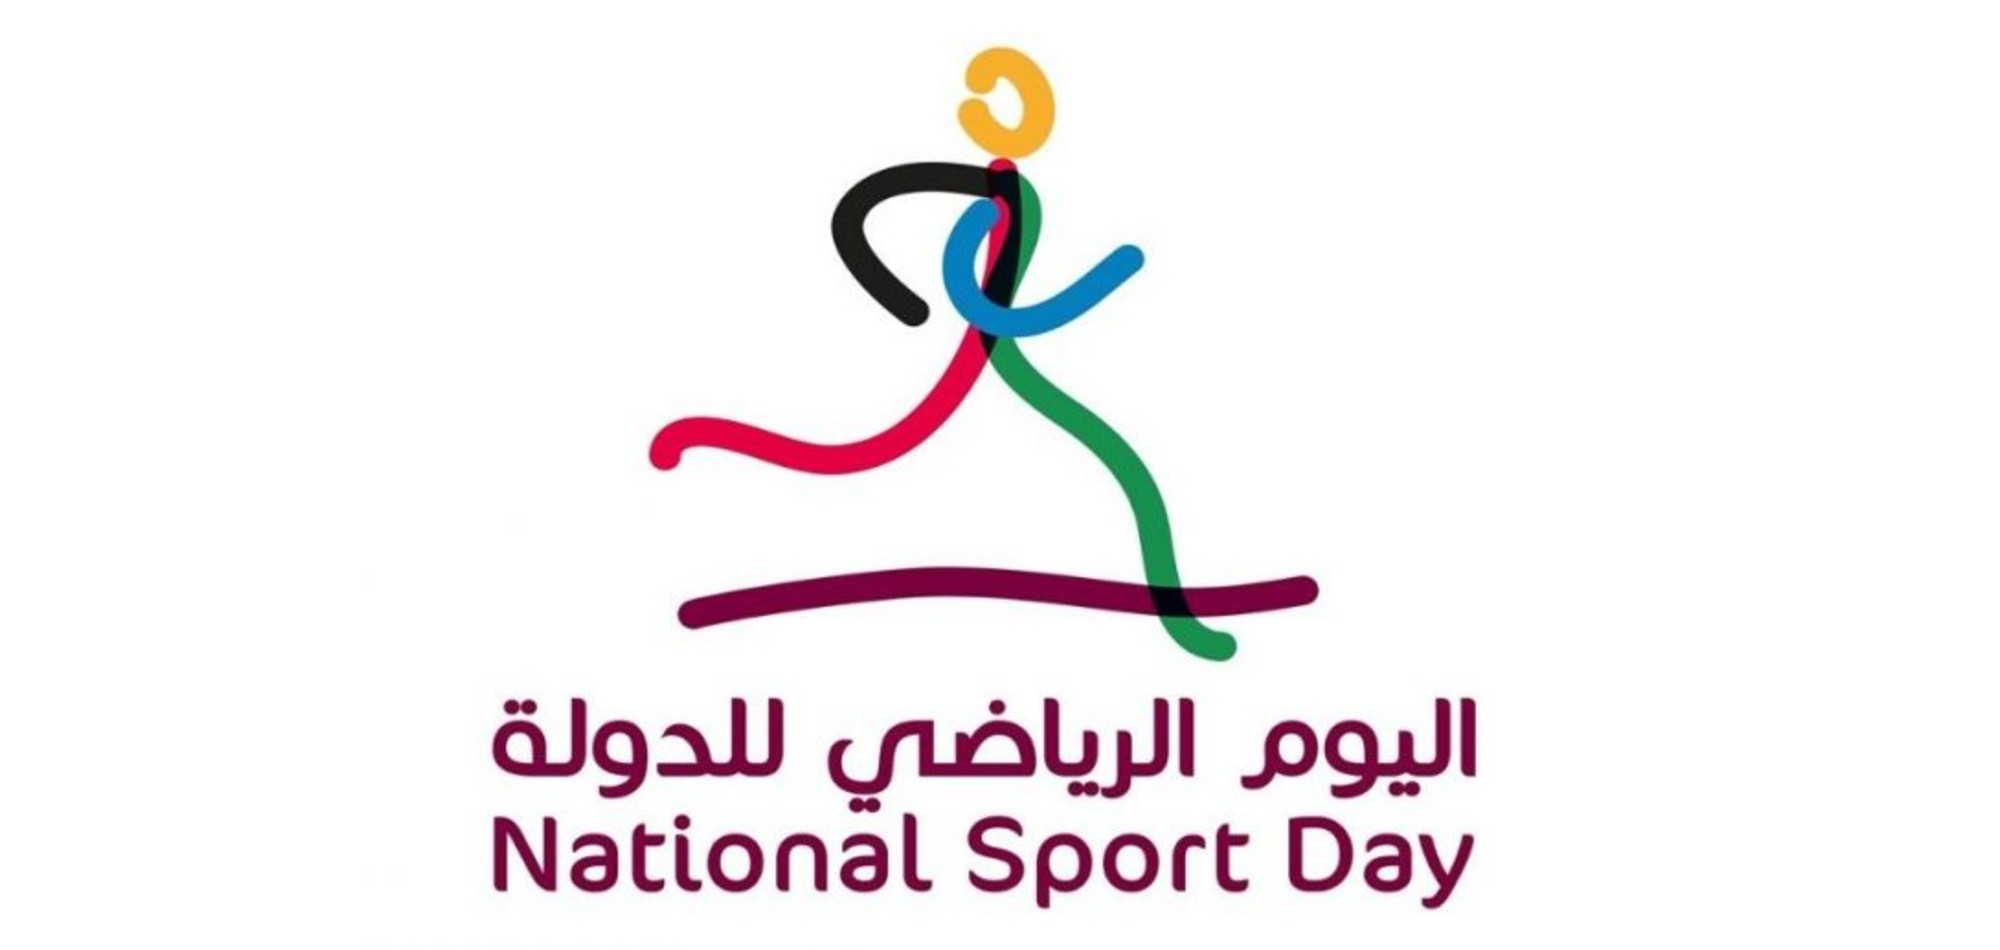 Ministries Issue Healthcare Protocol Ahead of National Sports Day